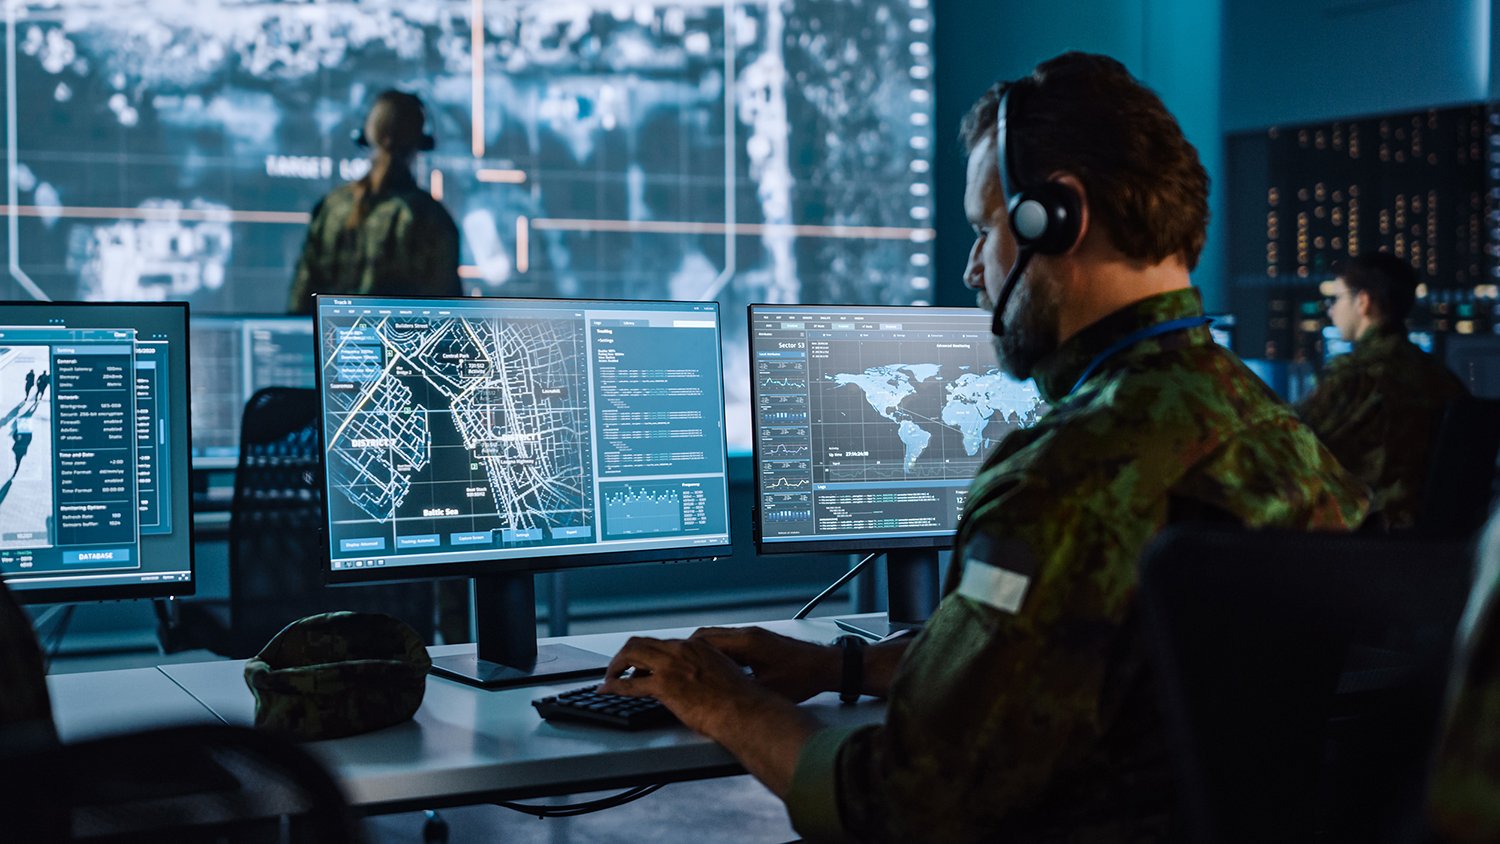 Military personnel thrive on situational awareness applications for mission success.